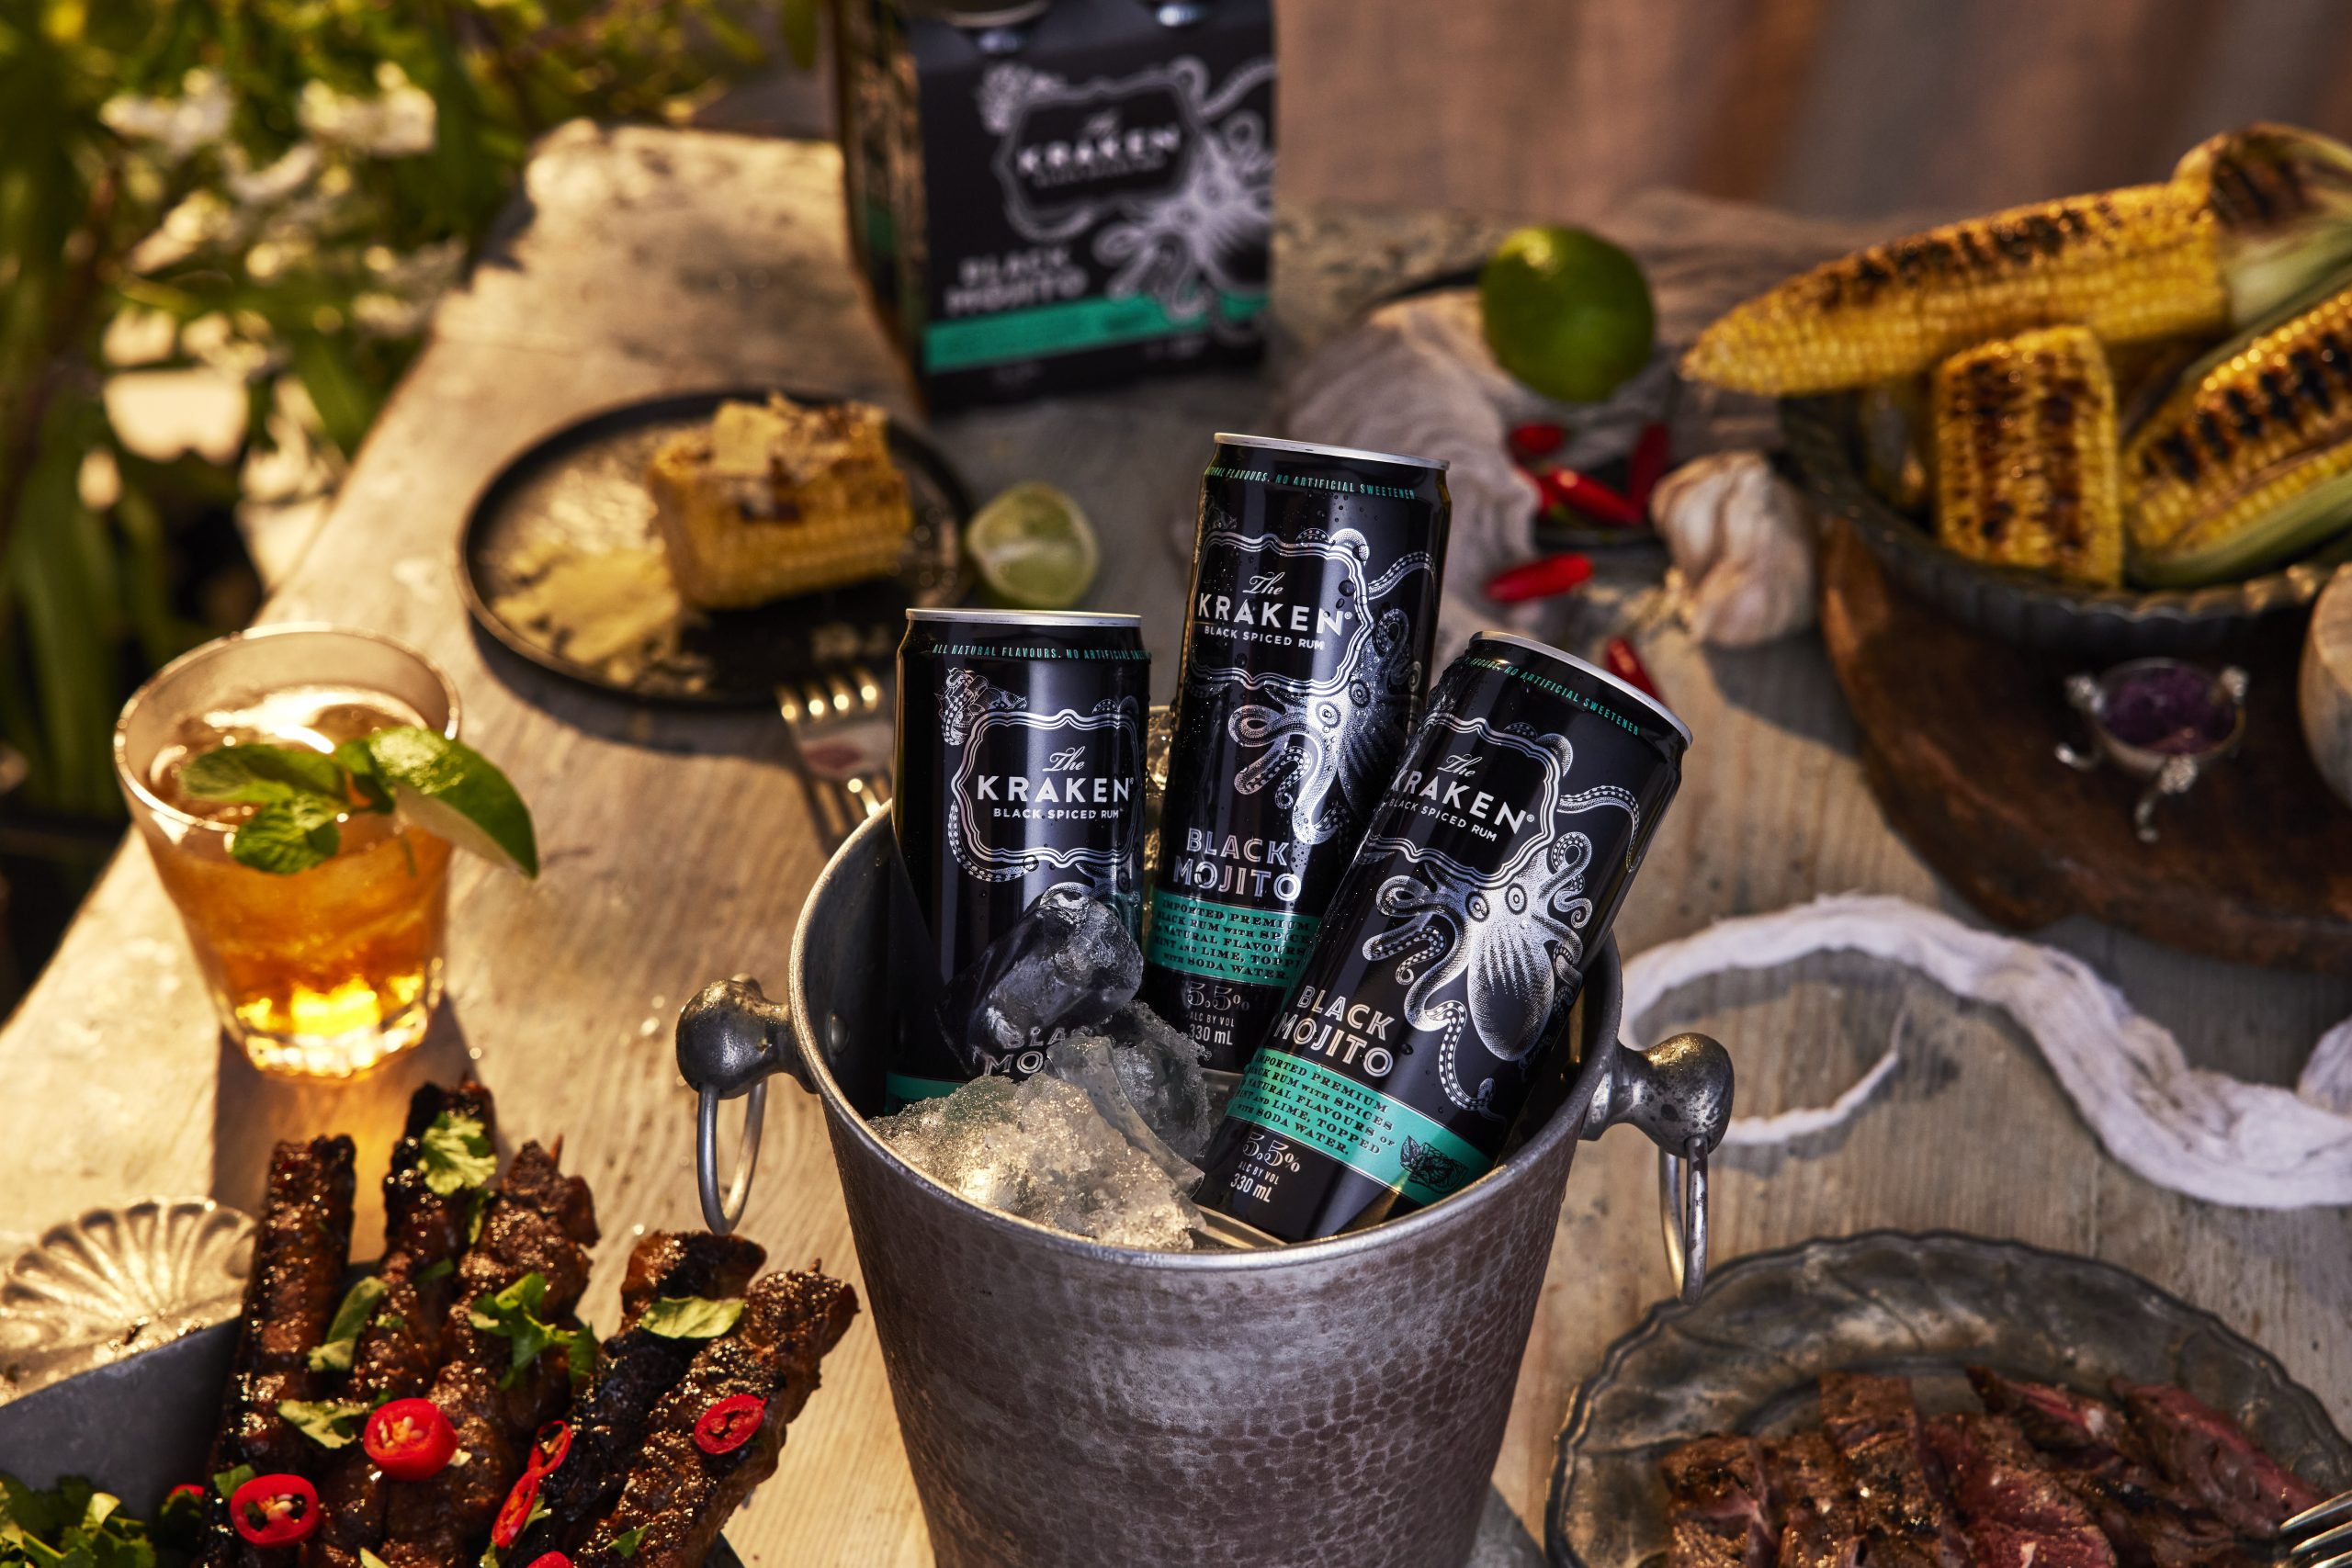 WIN! We're giving away a Kraken Rum gift pack with Kraken Black Mojito  cans, glasses and a cooler